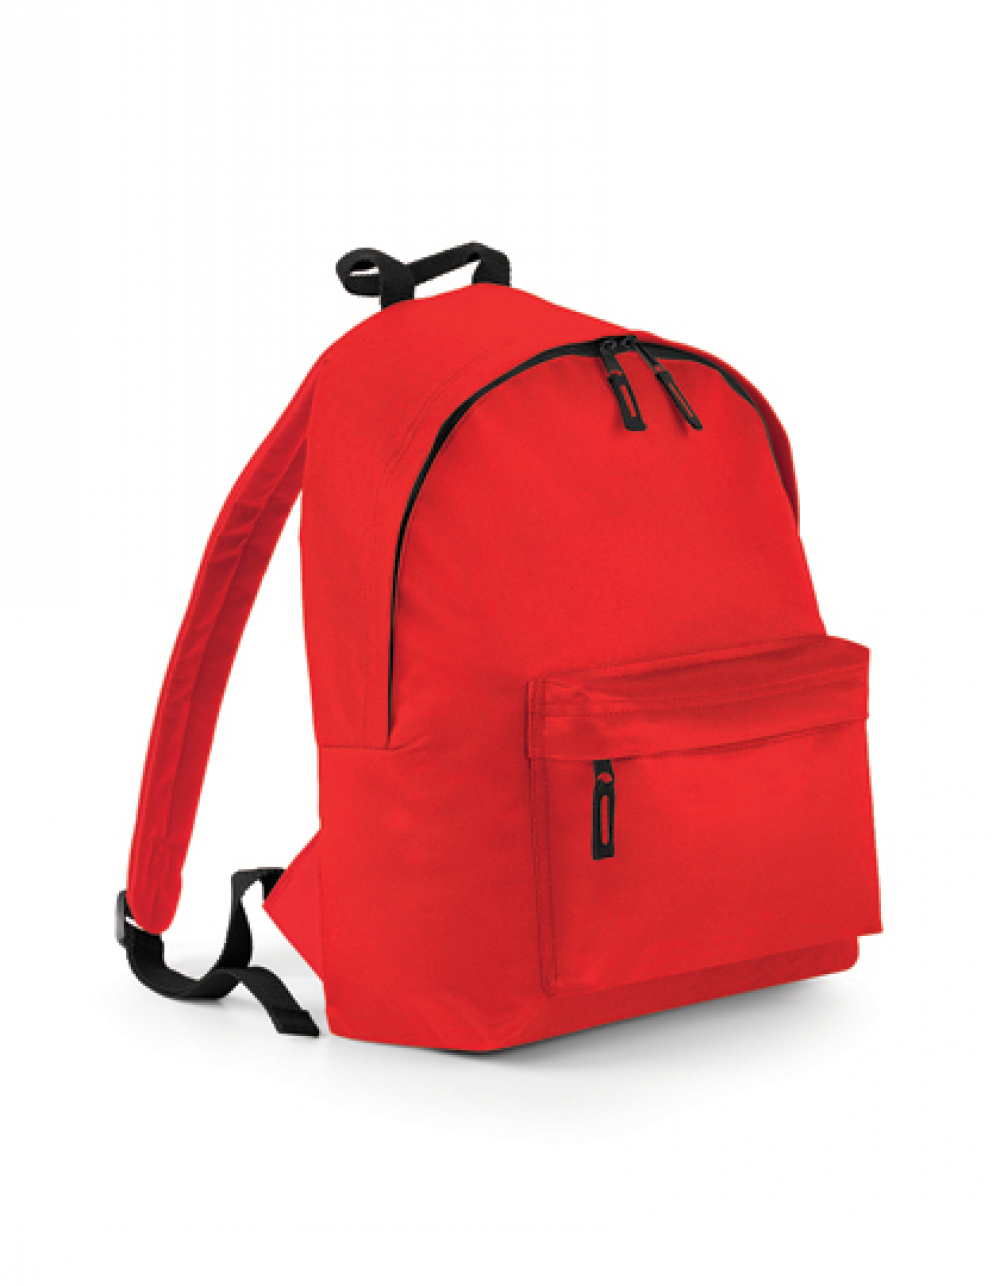 Rucksack Backpack bright red